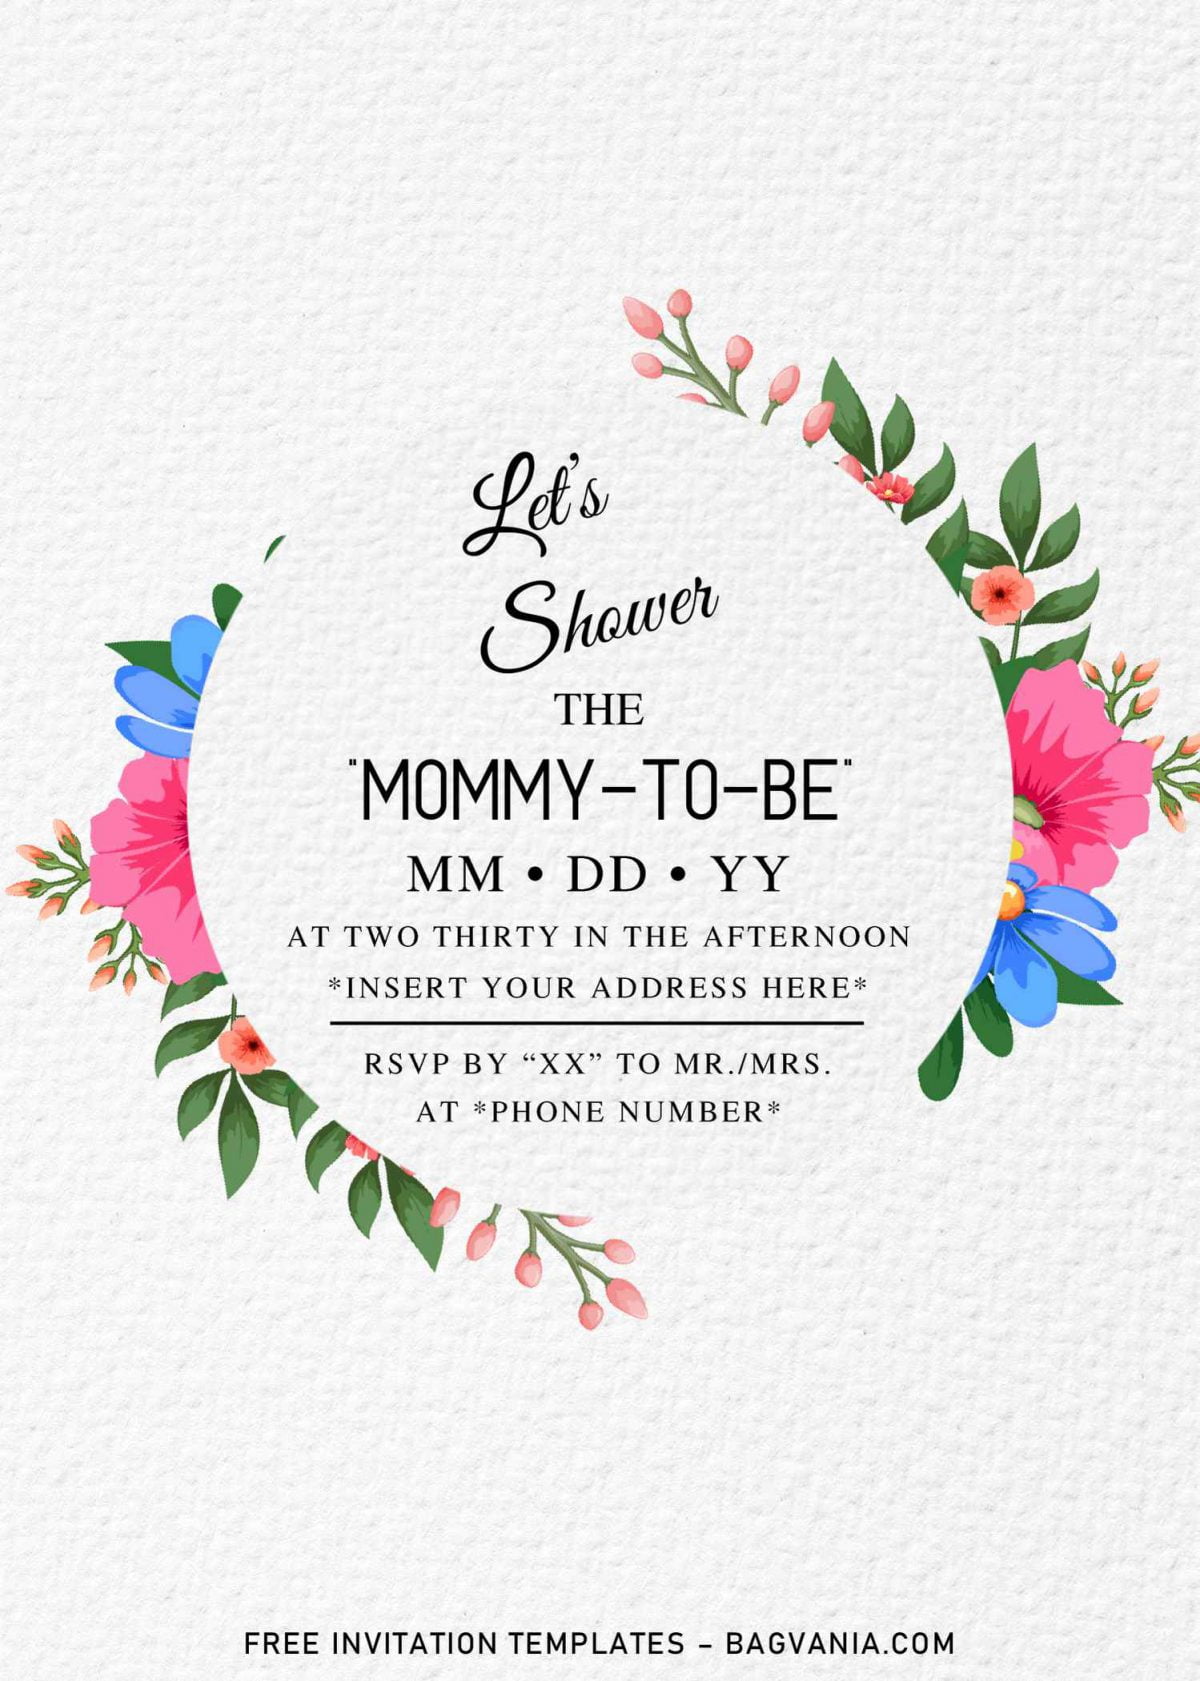 Free Summer Garden Baby Shower Invitation Templates Here and has pink and blue roses